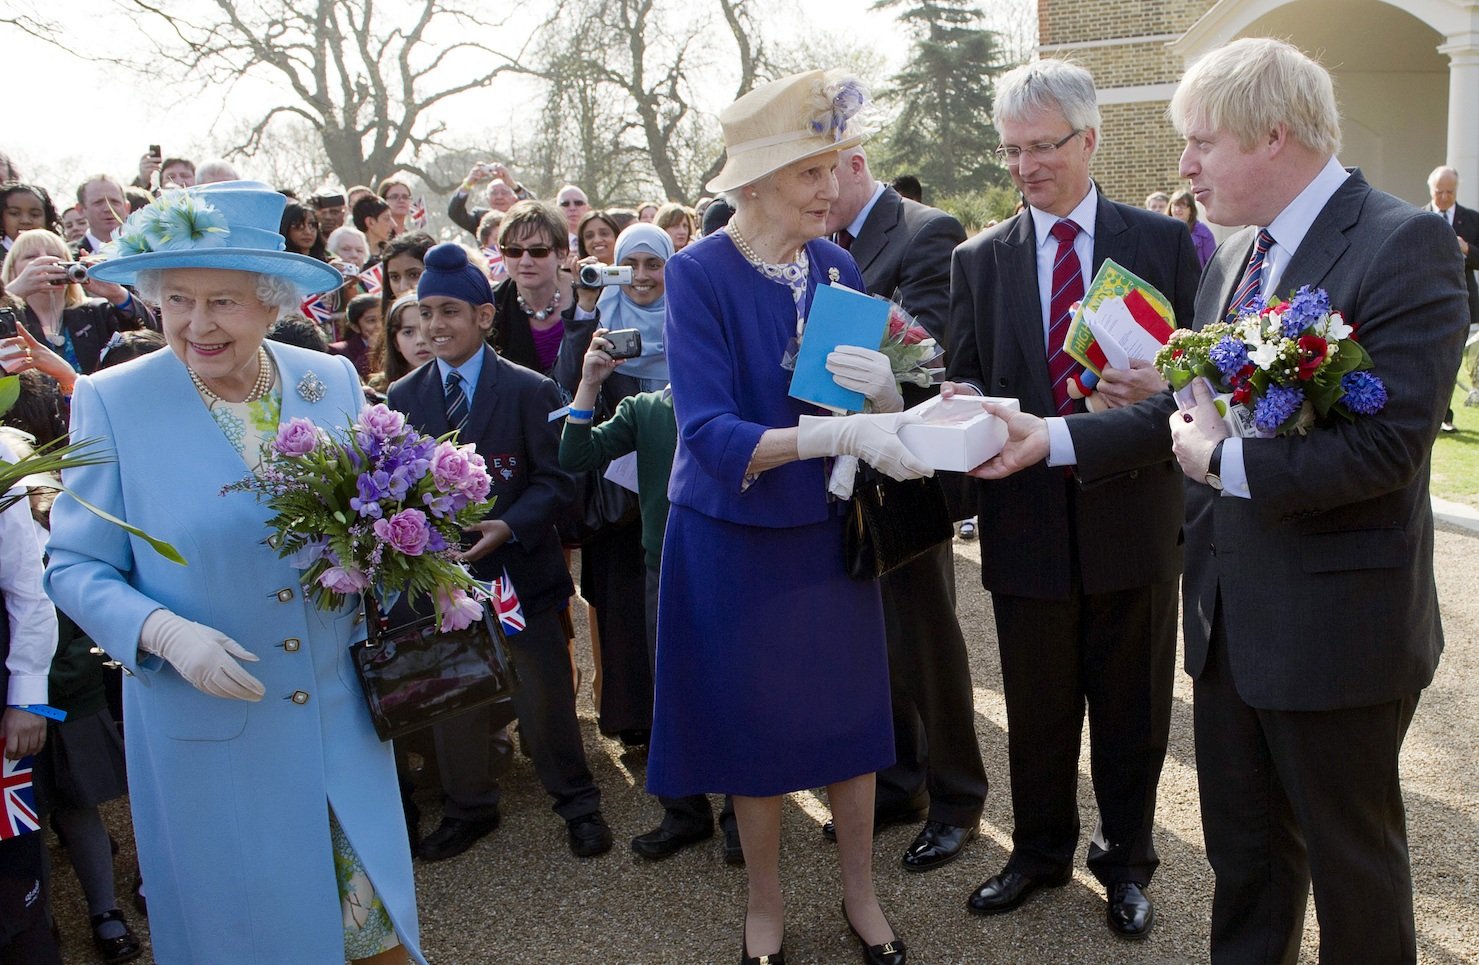 London Mayor Boris Johnson (R) and a lady-in-waiting (C) help Britain's Queen Elizabeth II (L) with her many gifts 